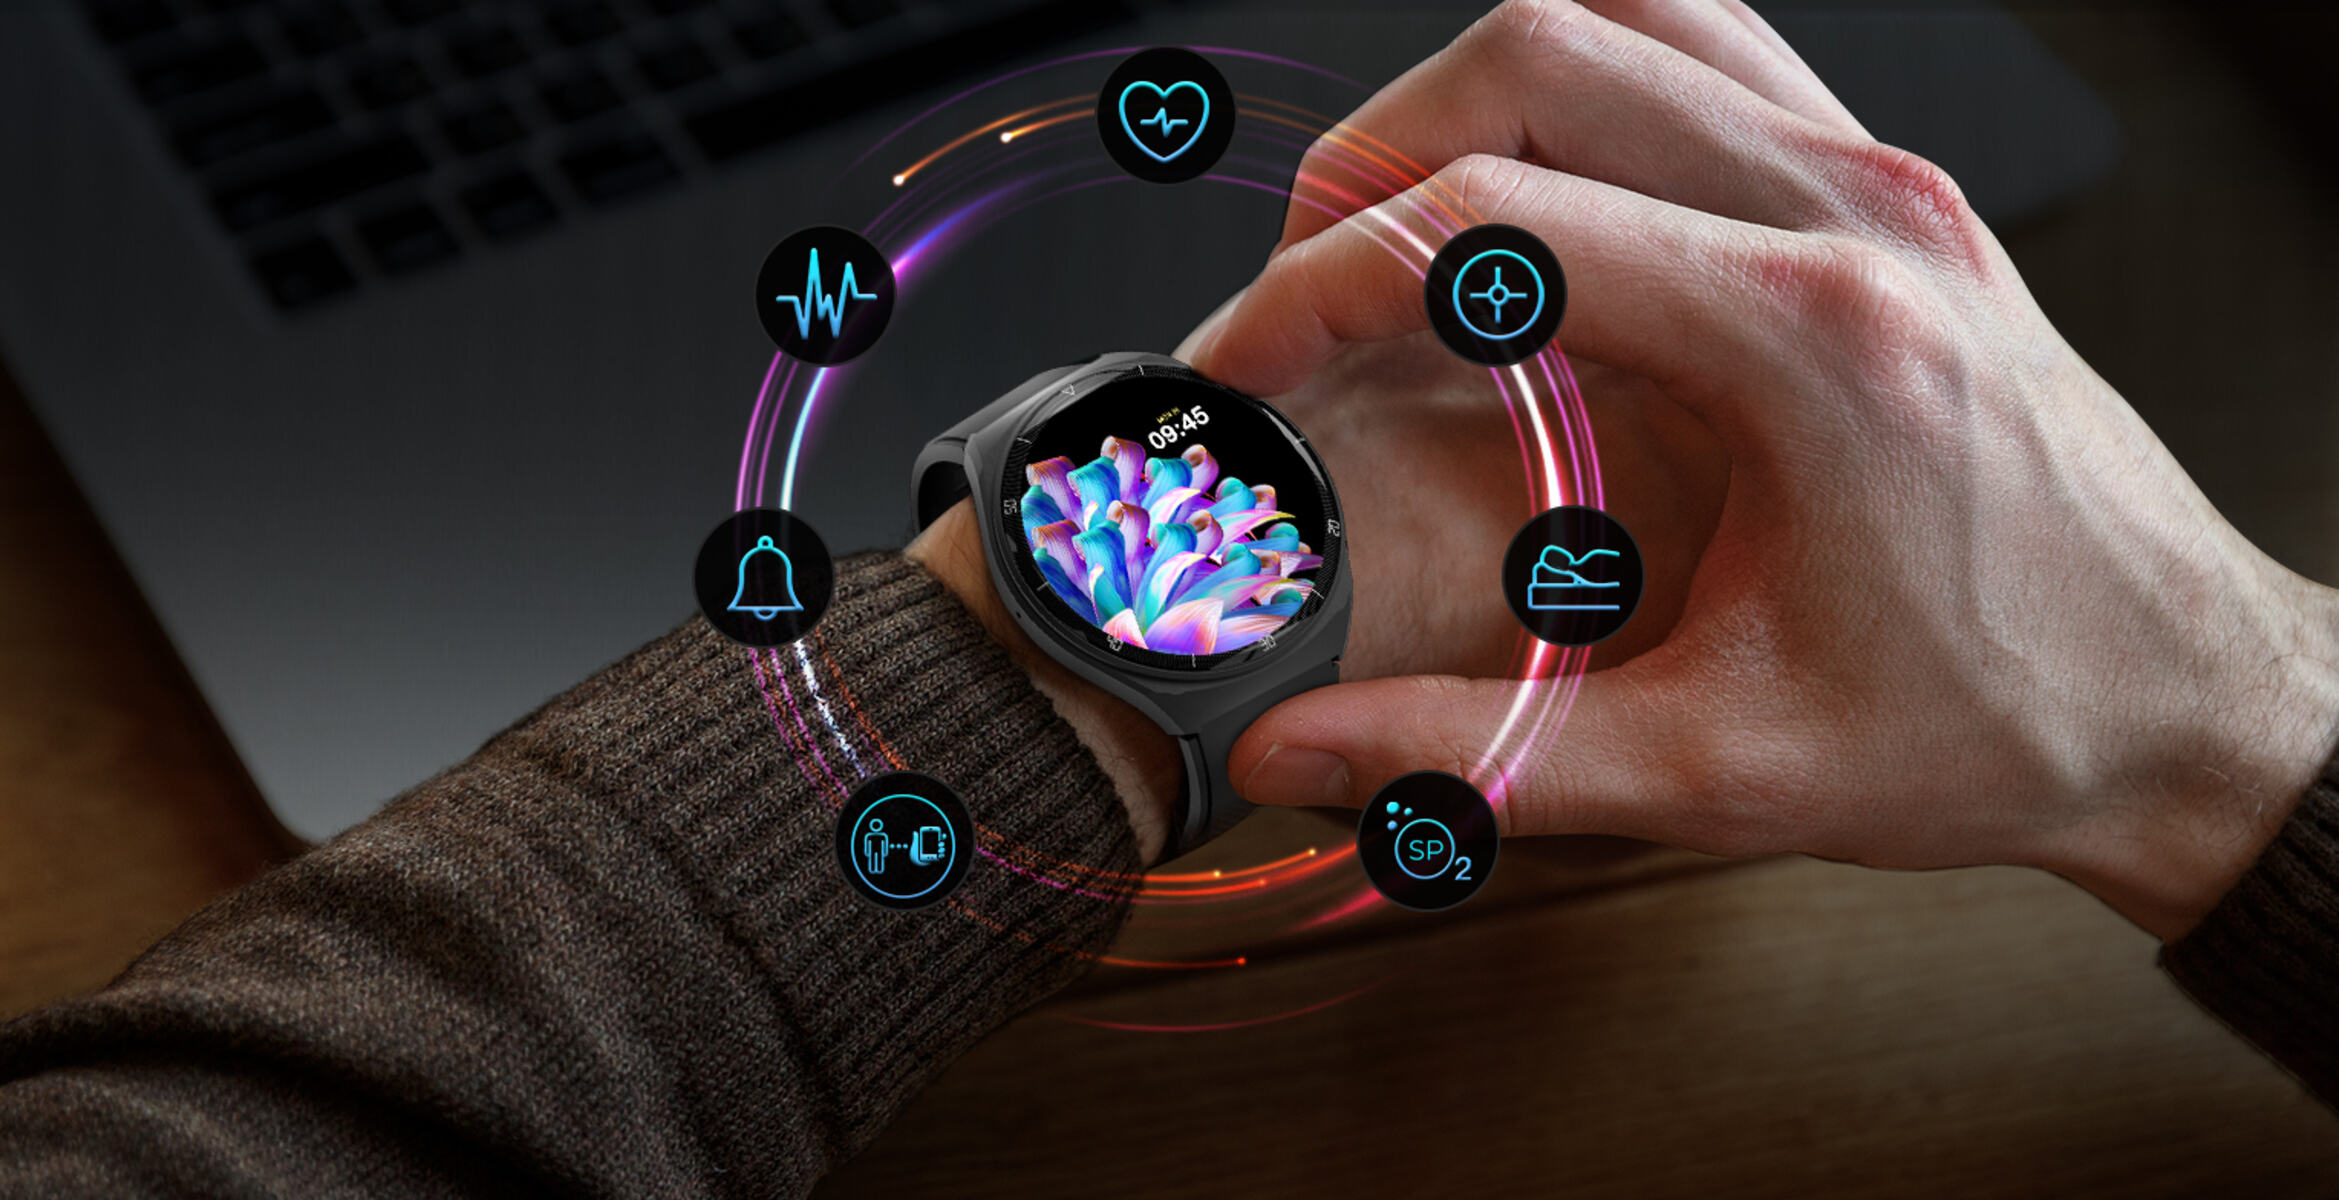 Inside The Technology: How Smartwatches Function